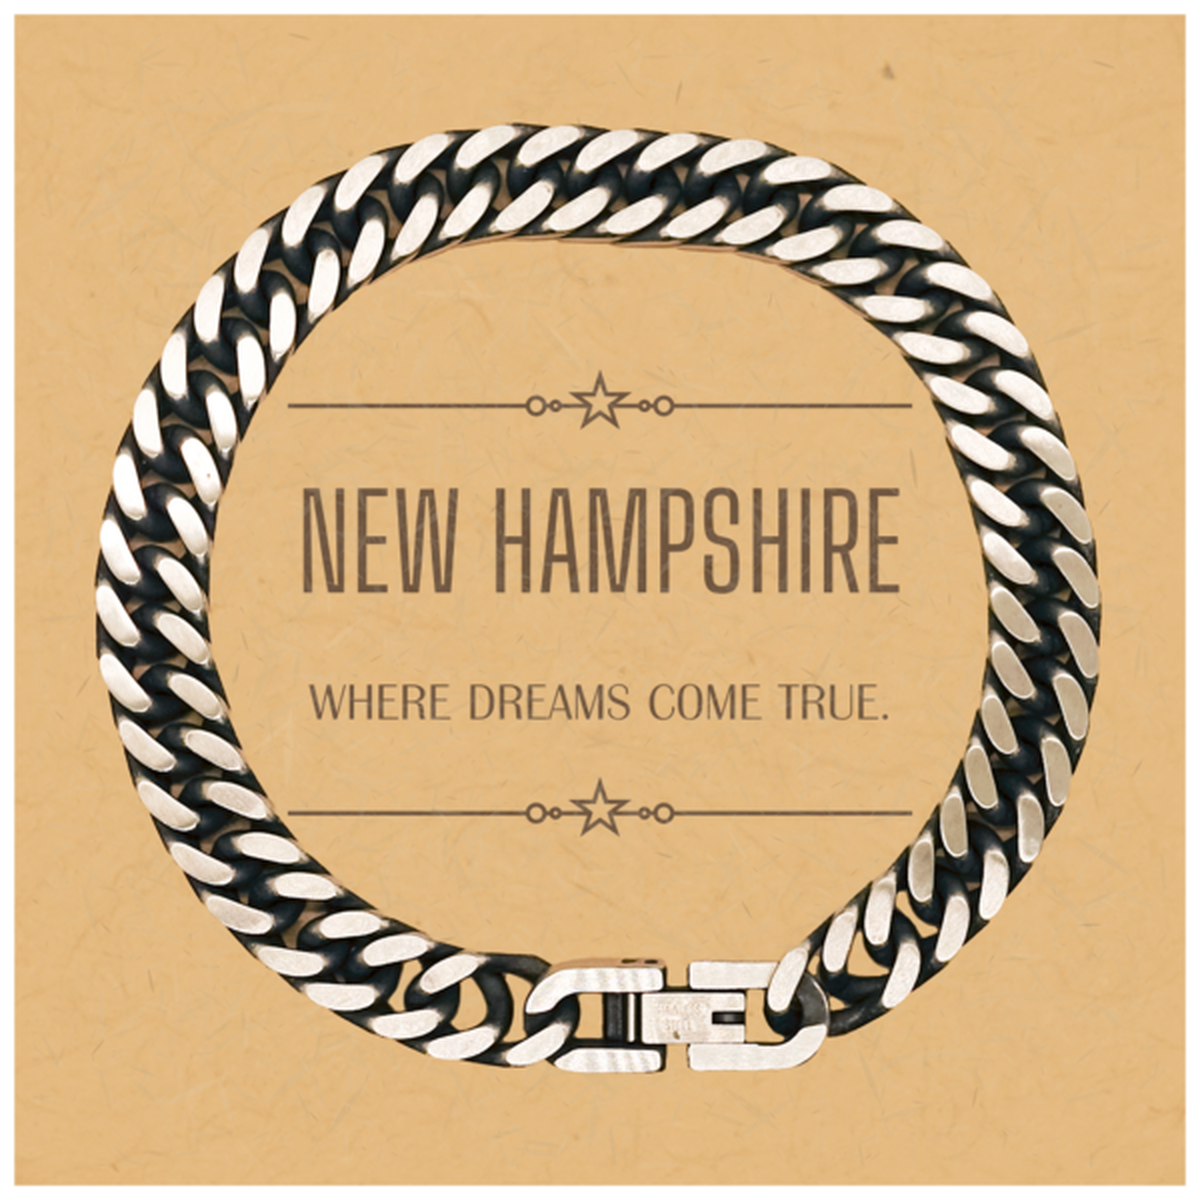 Love New Hampshire State Cuban Link Chain Bracelet, New Hampshire Where dreams come true, Birthday Christmas Inspirational Gifts For New Hampshire Men, Women, Friends